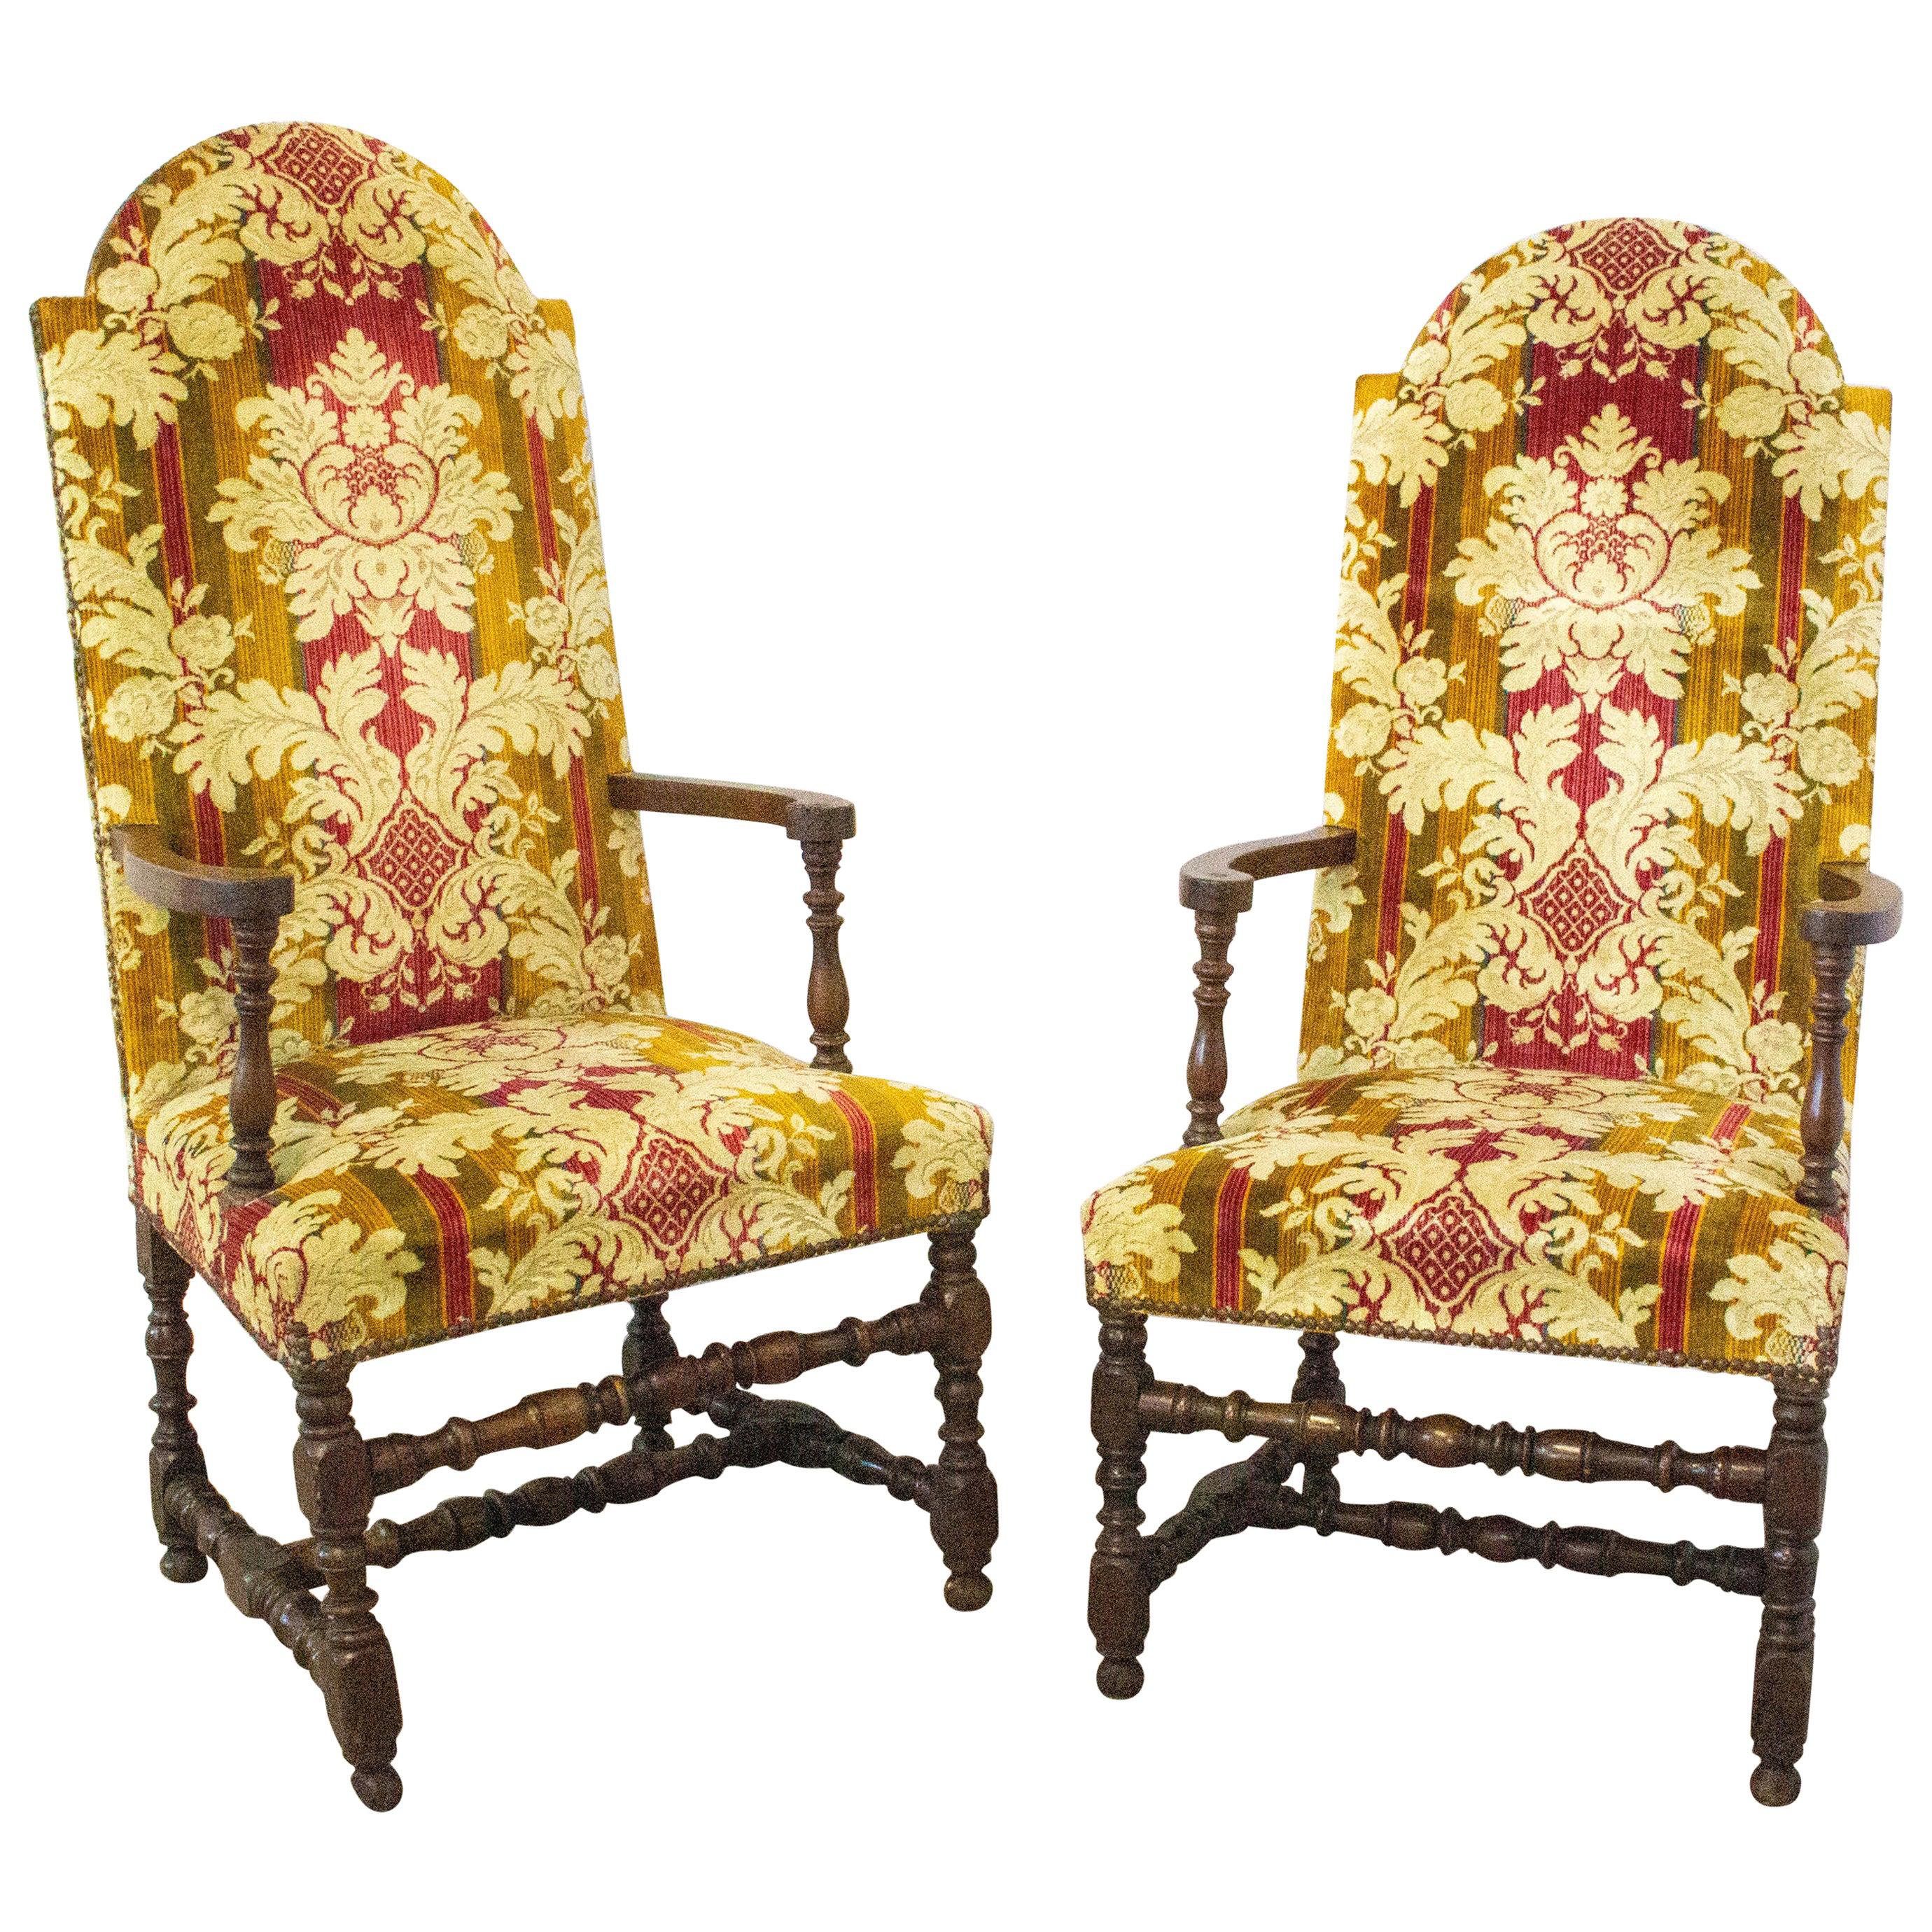 Pair of Chairs Spanish Open Armchairs, 18th Century